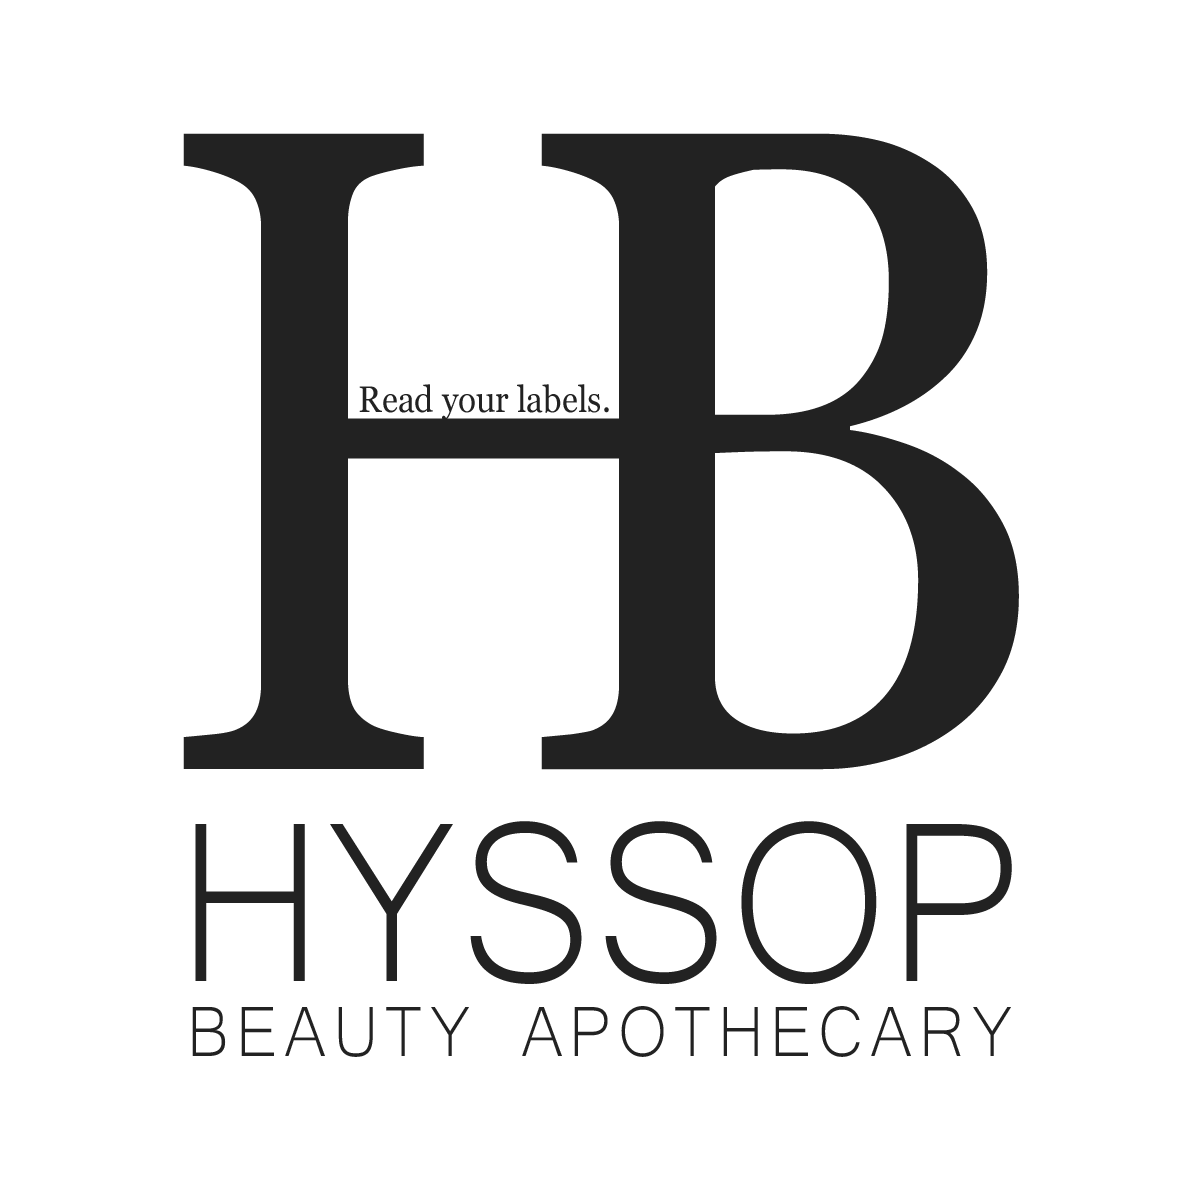 The Story of Hyssop Beauty Apothecary